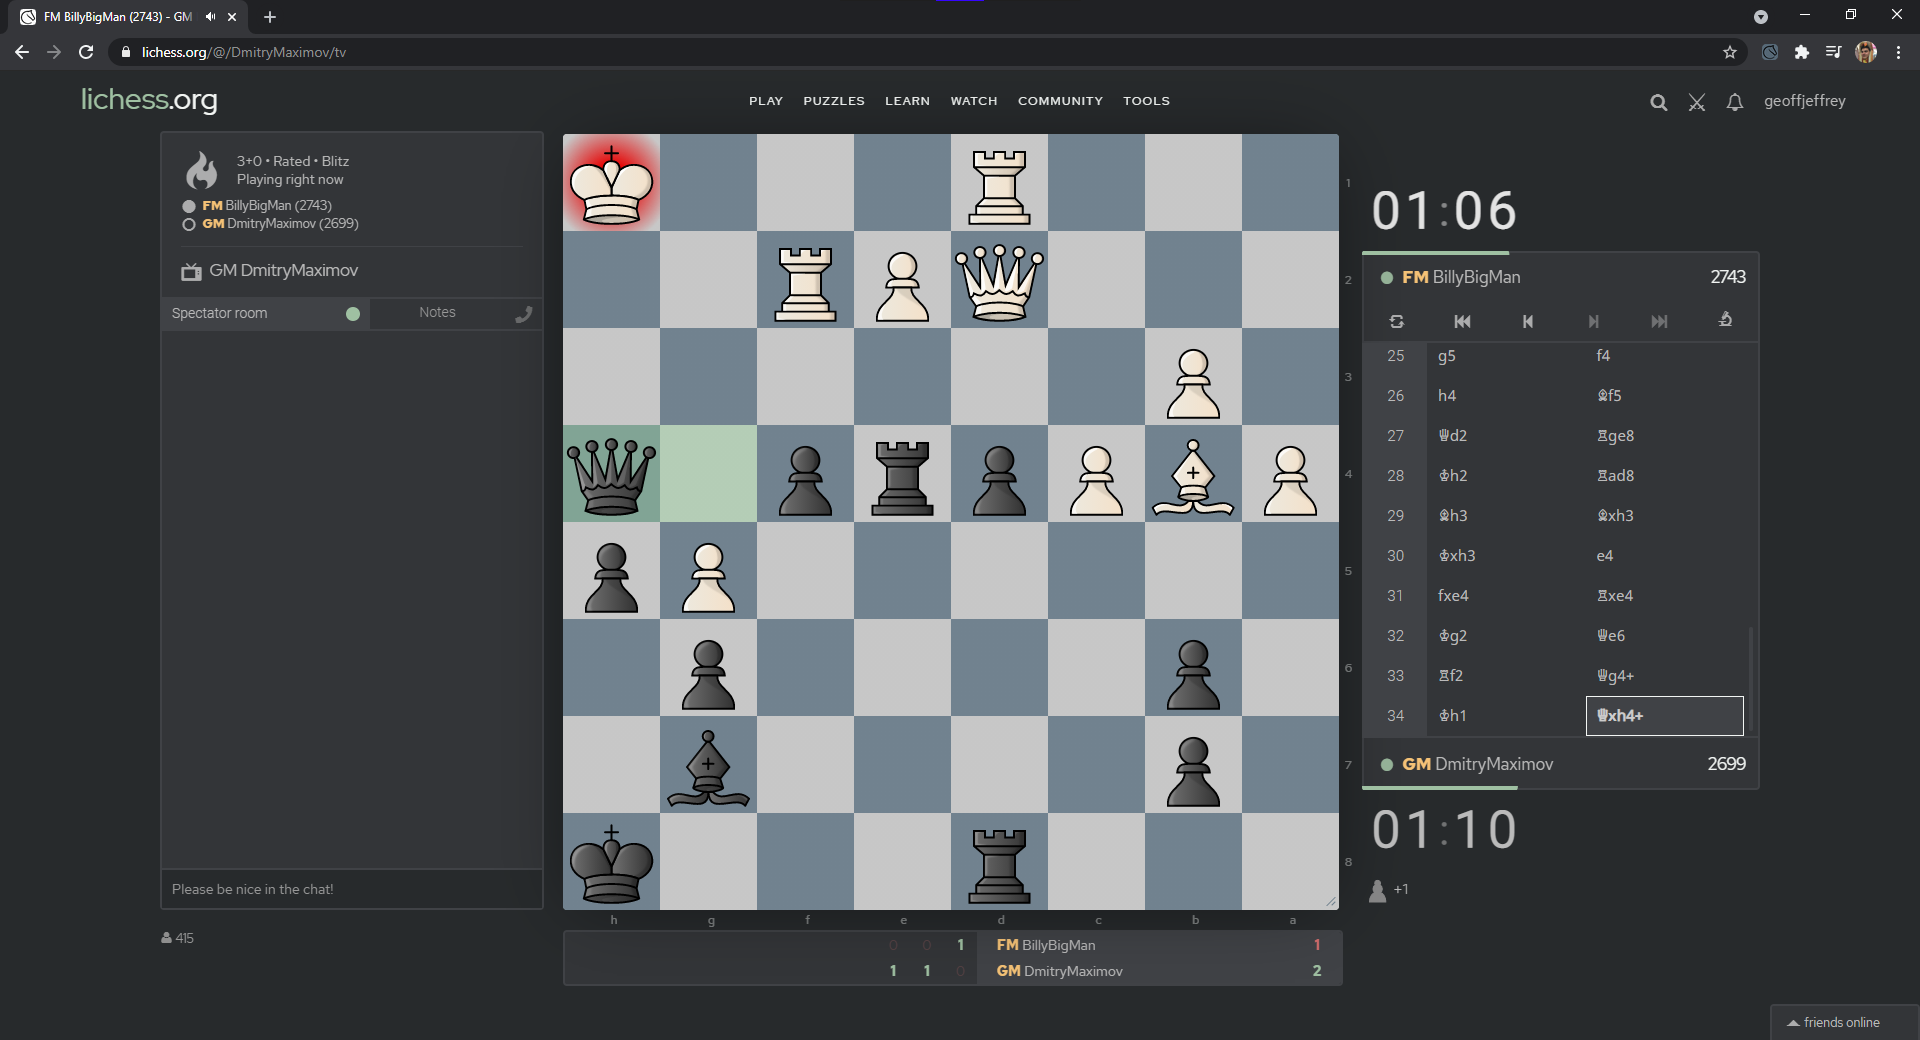 Game analysis pollutes browser history · Issue #11349 · lichess-org/lila ·  GitHub